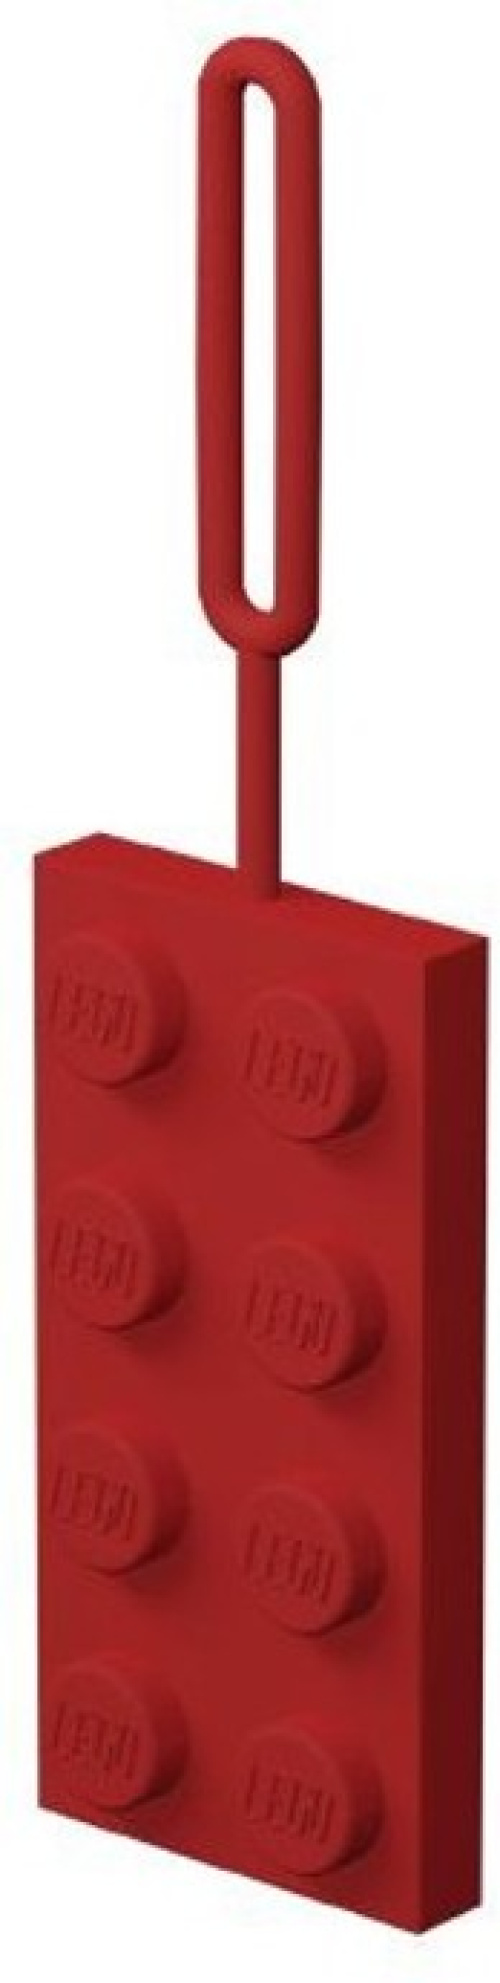 5005340-1 2x4 Red Silicone Luggage Tag